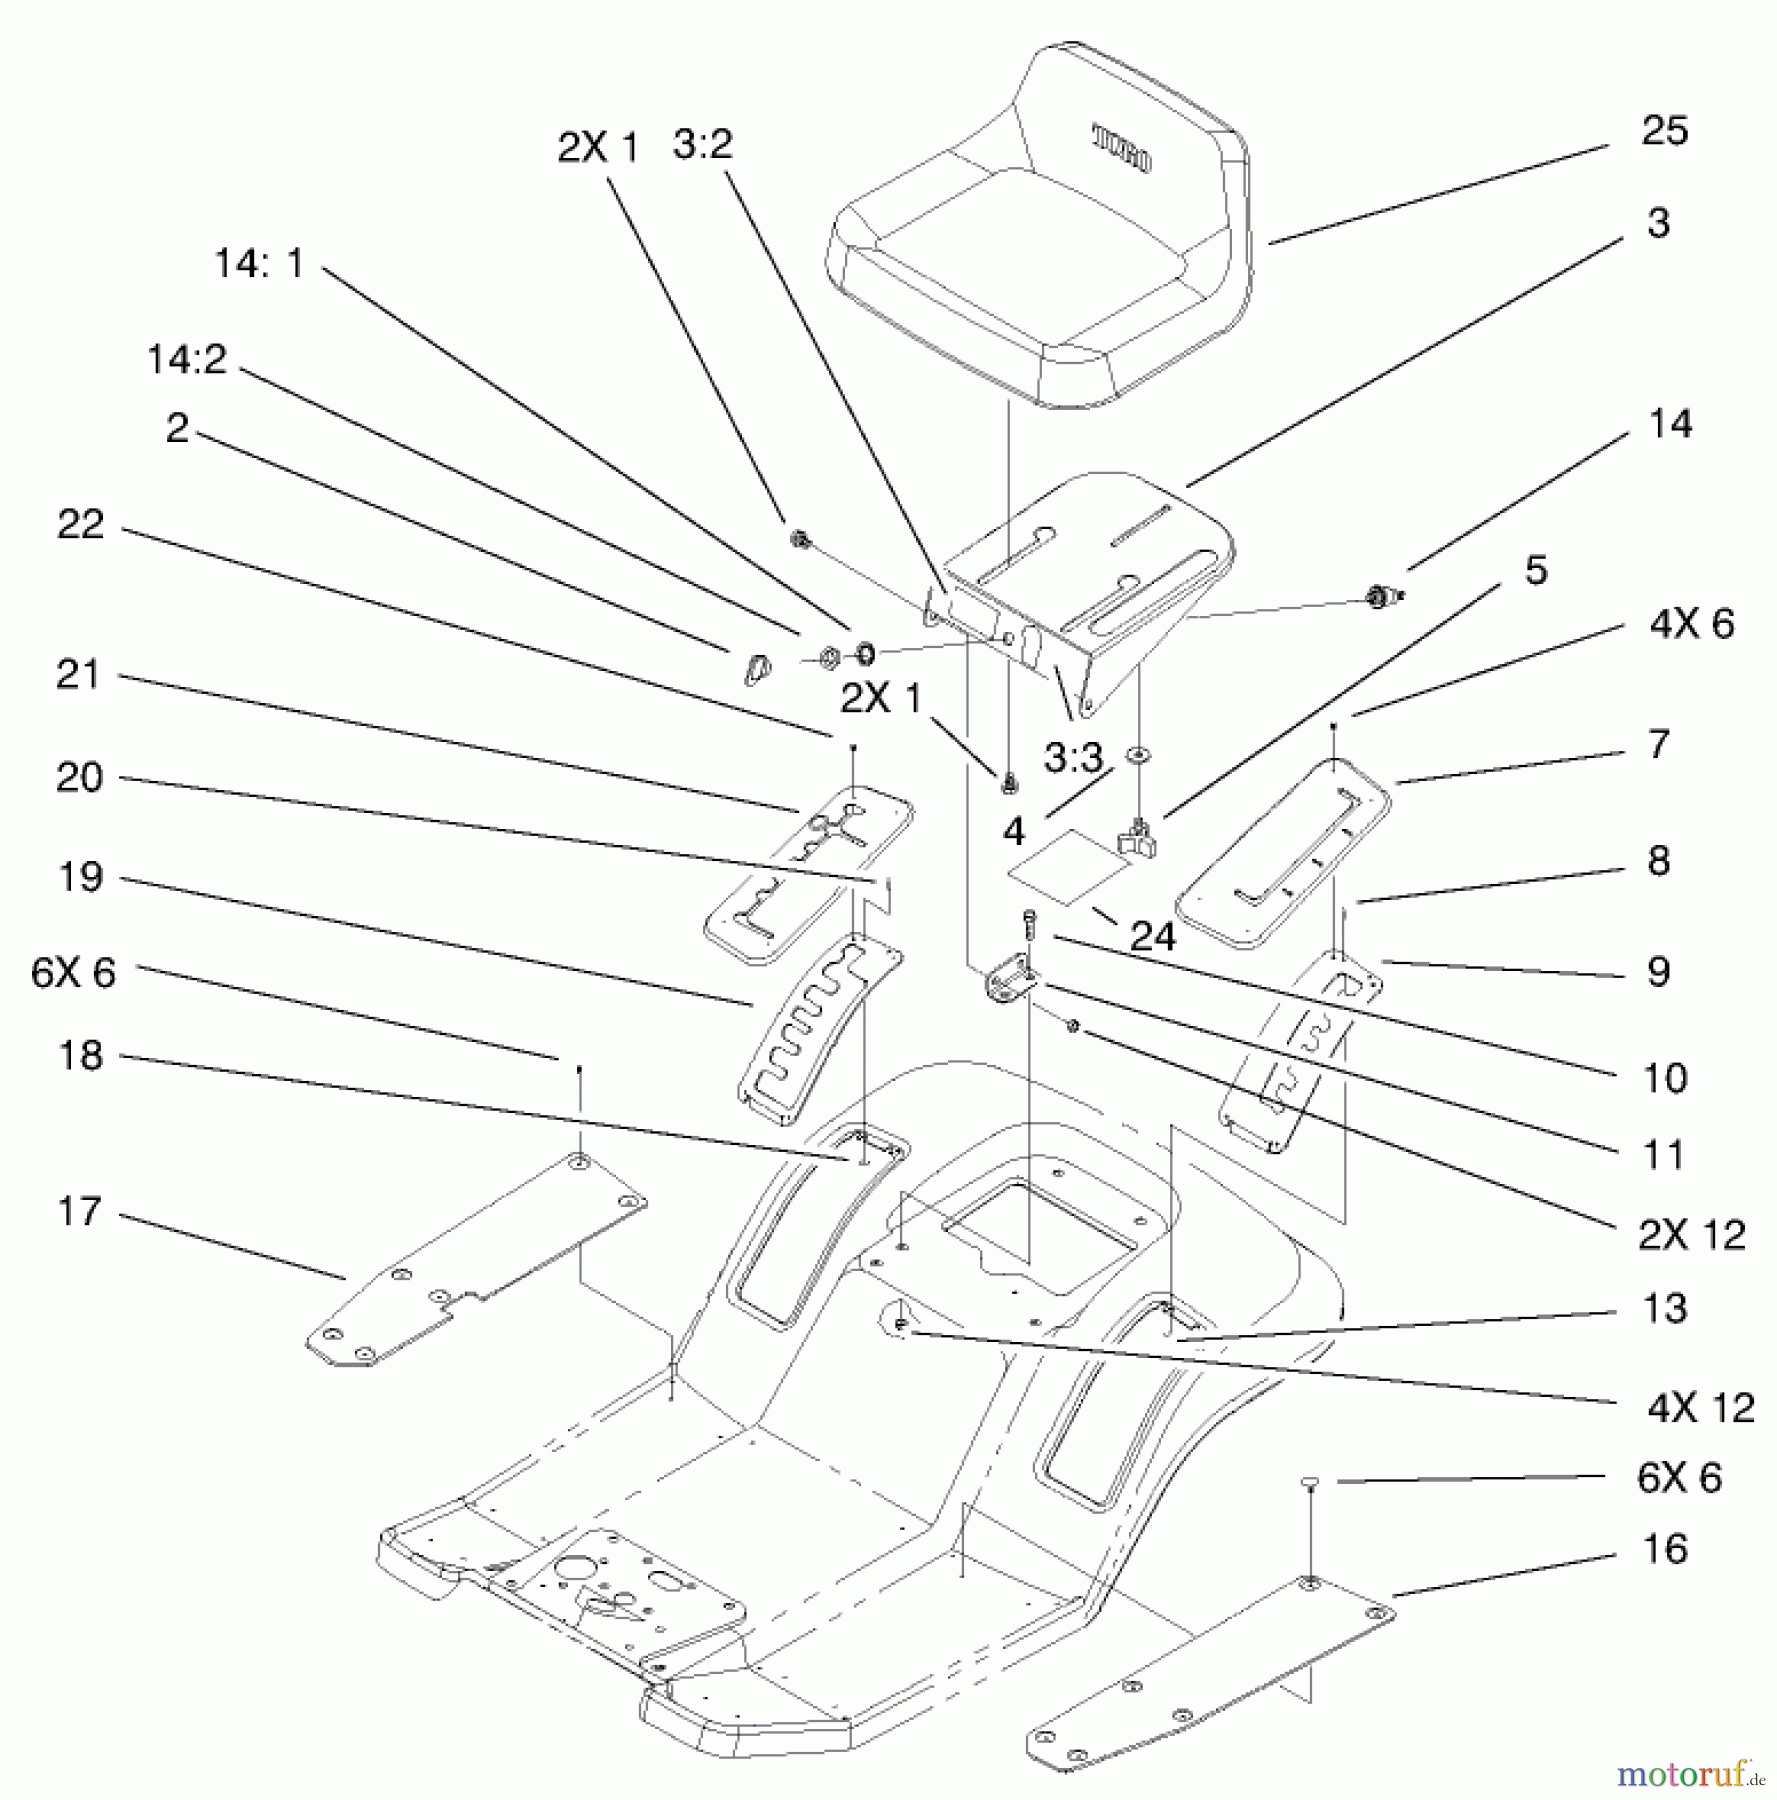  Toro Neu Mowers, Lawn & Garden Tractor Seite 1 71301 (12.5-32XLE) - Toro 12.5-32XLE Lawn Tractor, 2001 (210000001-210999999) REAR BODY AND SEAT ASSEMBLY